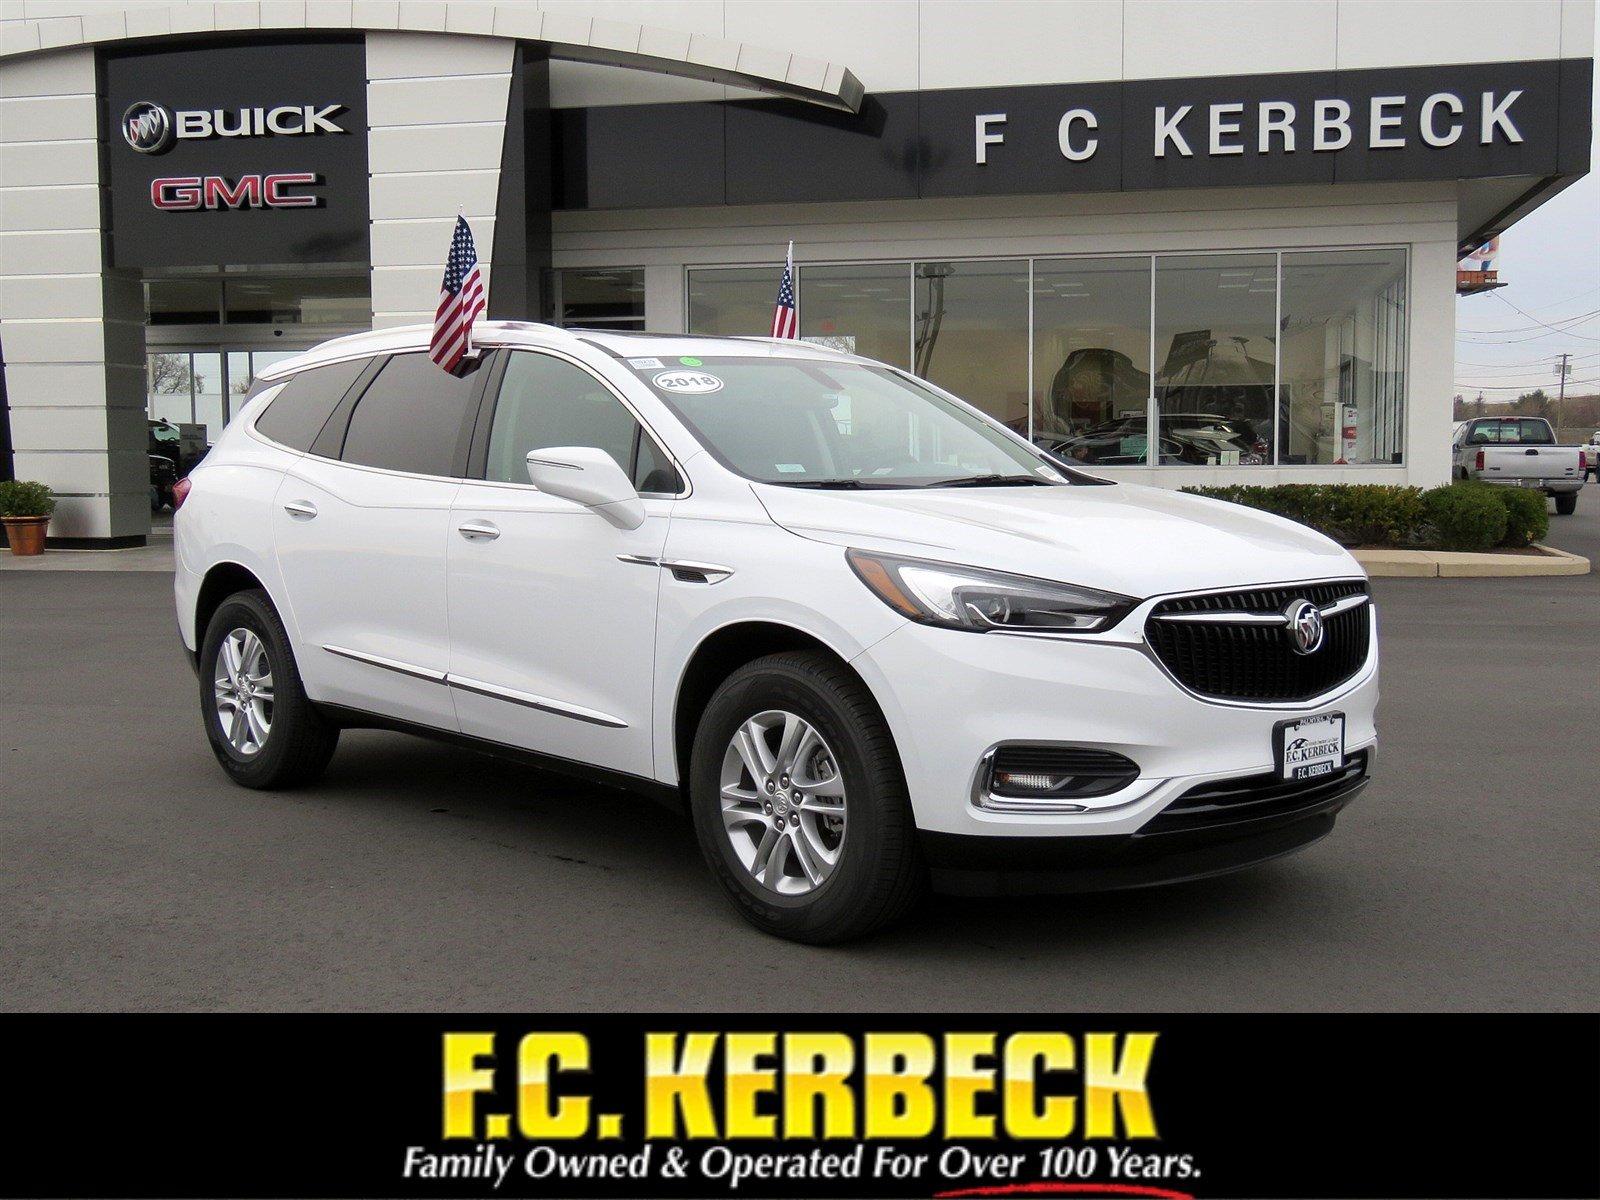 New 2018 Buick Enclave Essence for sale Sold at F.C. Kerbeck Aston Martin in Palmyra NJ 08065 1